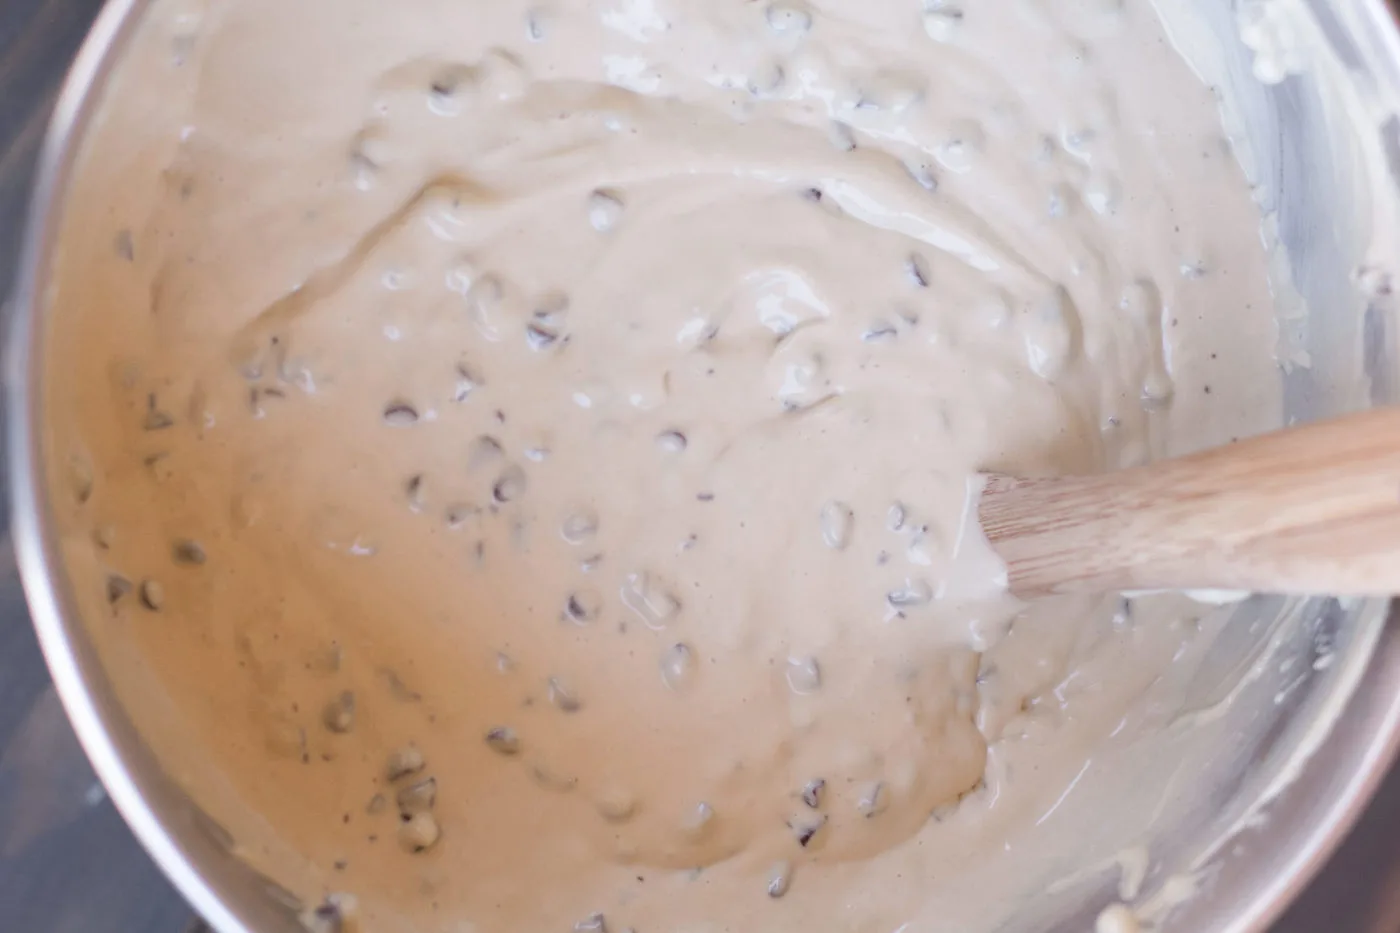 Mini chocolate chips mixed into the batter